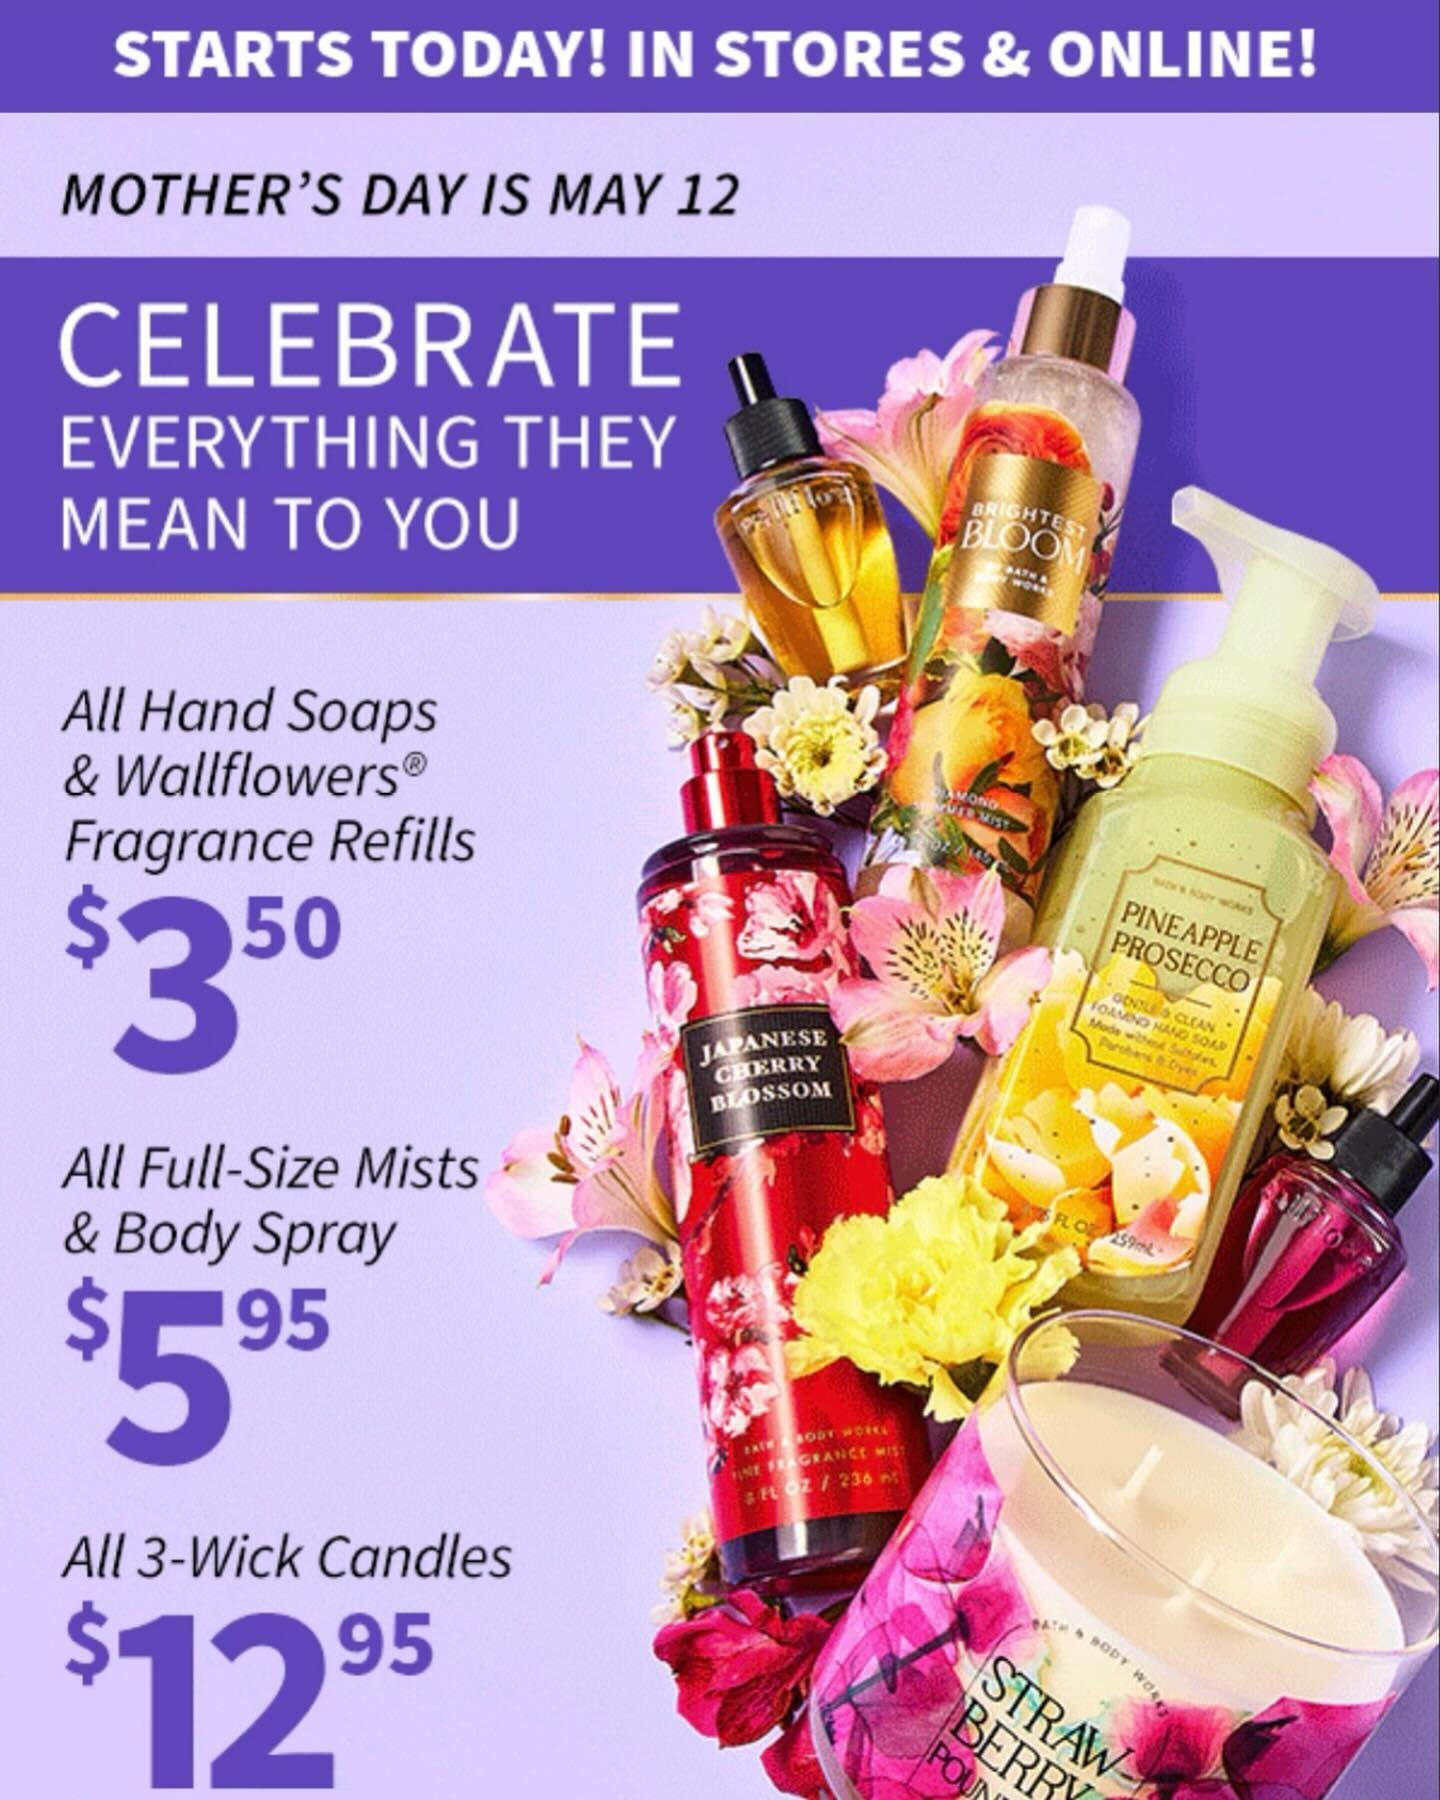 The Mother&rsquo;s Day sales have begun at La Palmera! Let that special mother-figure bathe in the amazing scents this season at @bathandbodyworks at La Palmera with huge savings. 💐